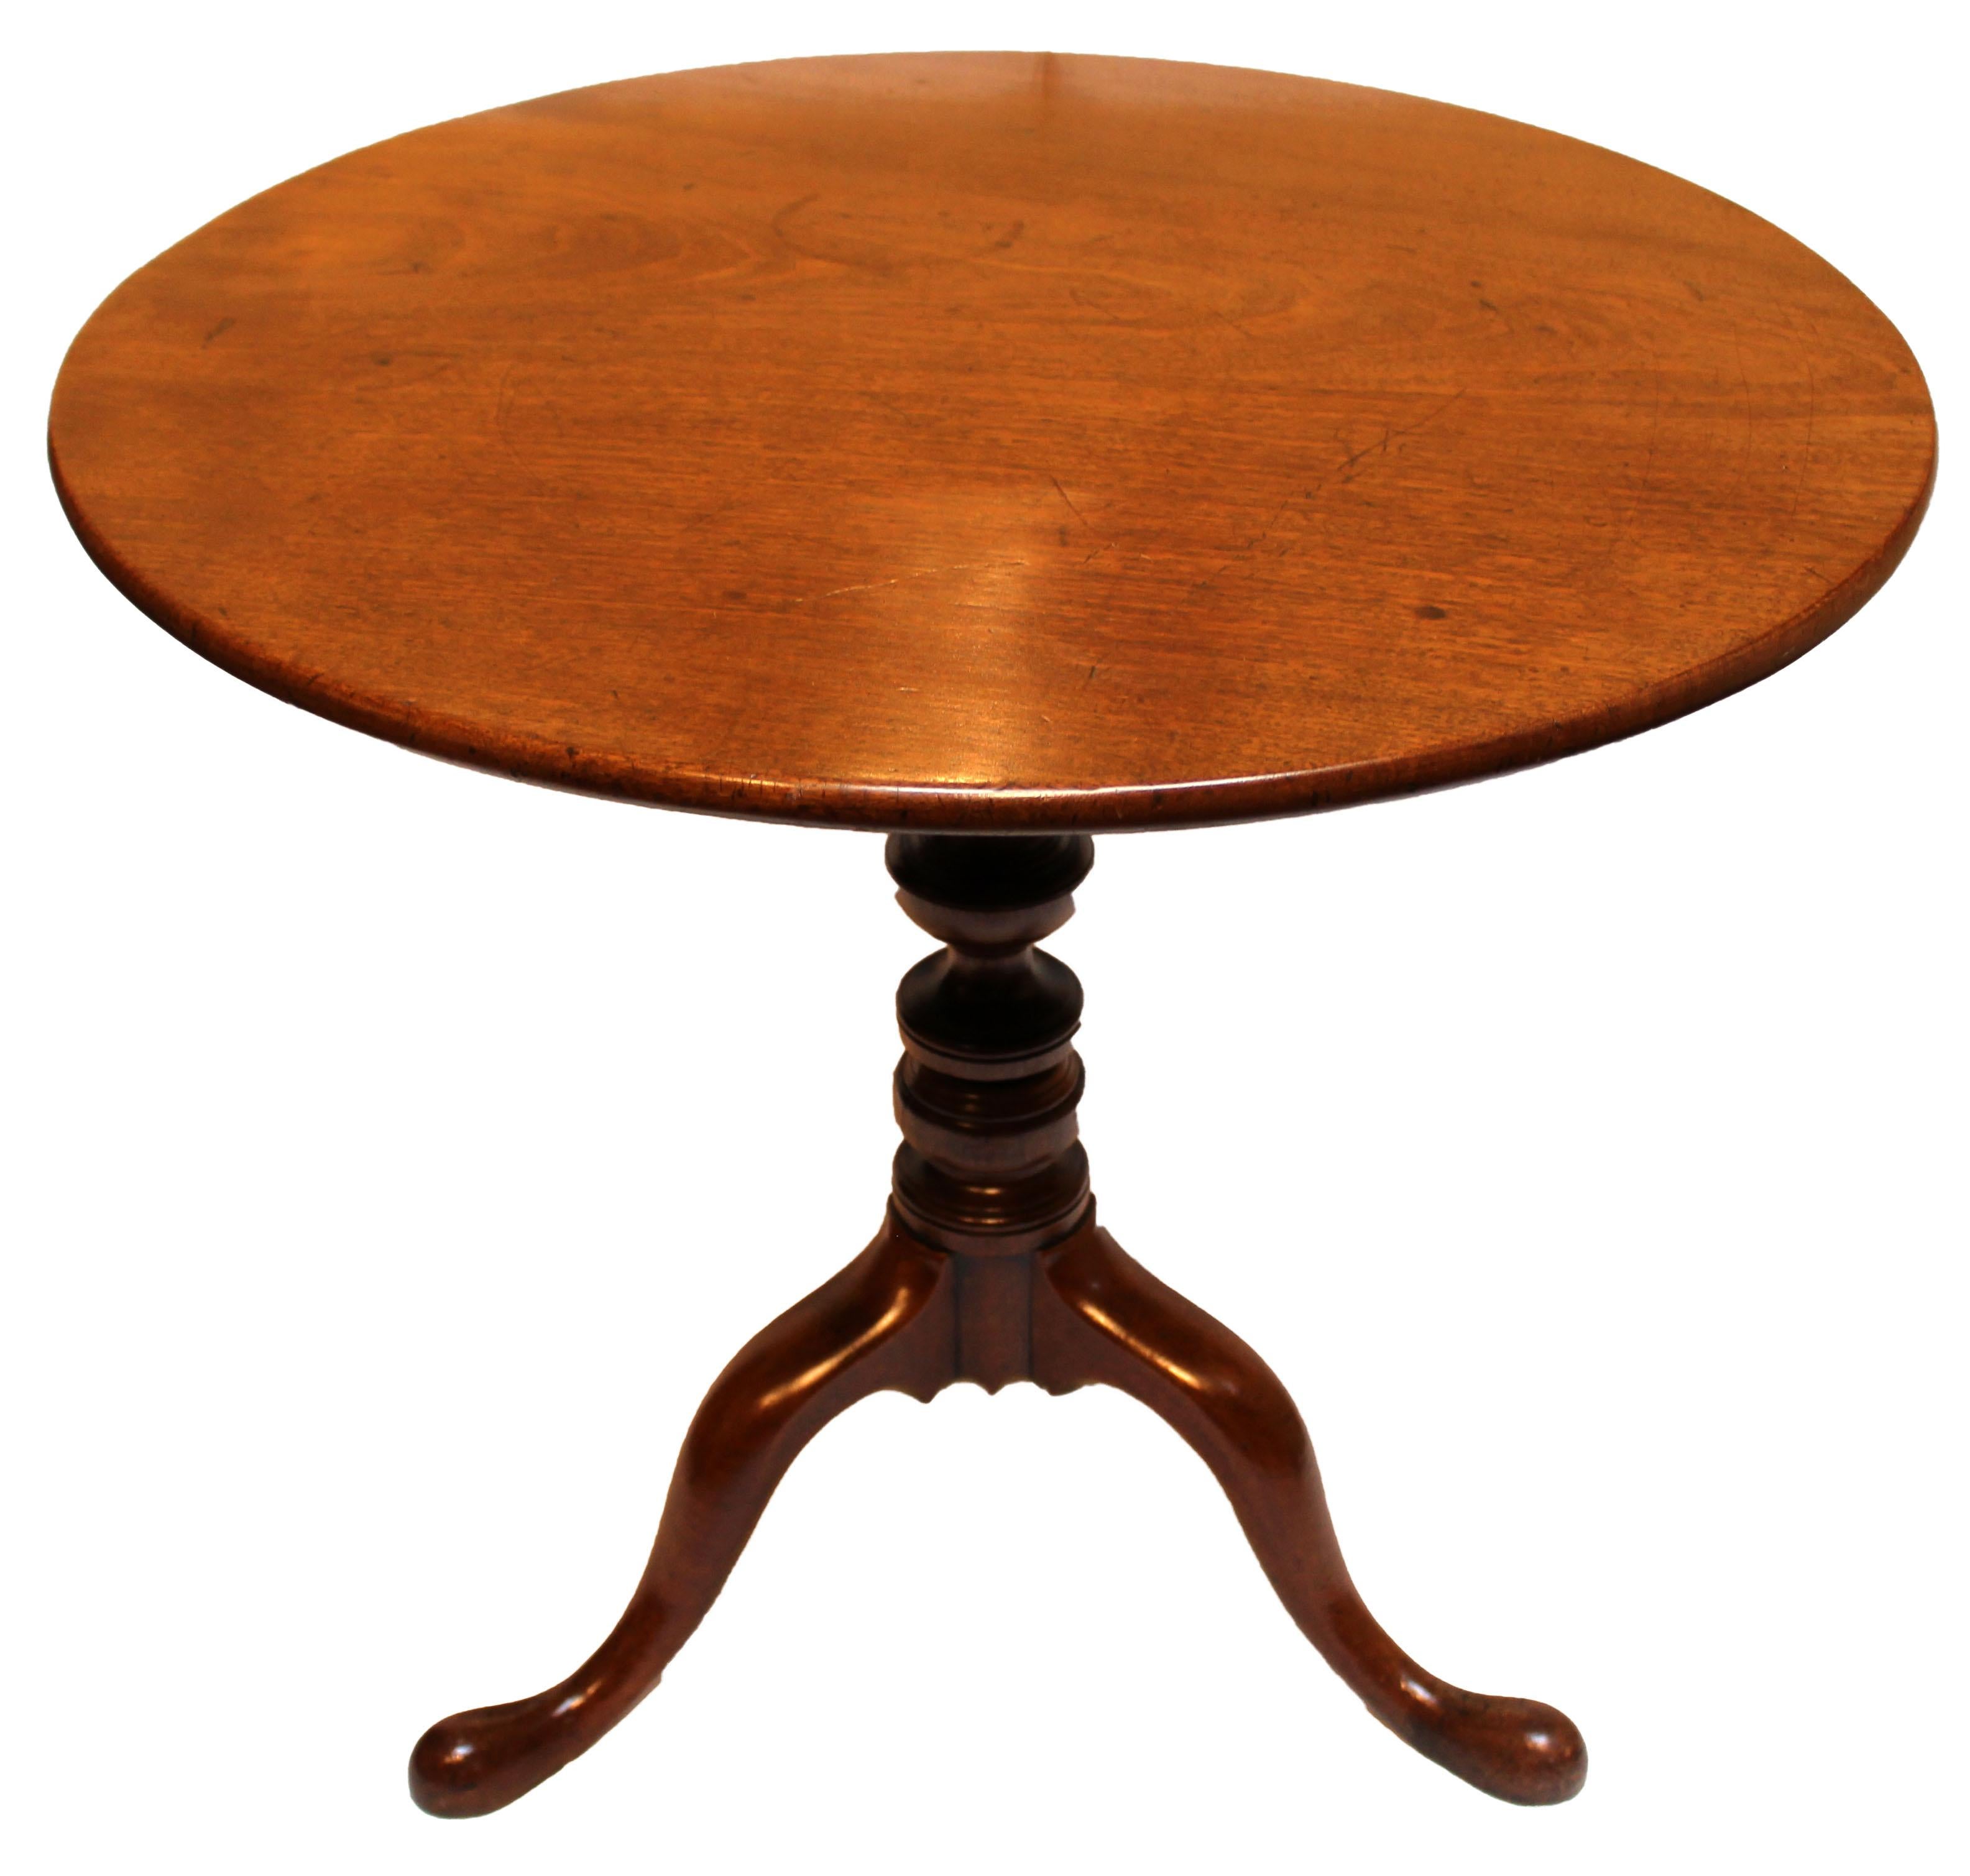 Circa 1780 George III period tilt-top tea table, English. Mahogany with fine figure to the top. Raised on very well turned pedestal ending in three shaped cabriole legs with pad feet. Ring & marks on top commensurate with age & use.
30.25